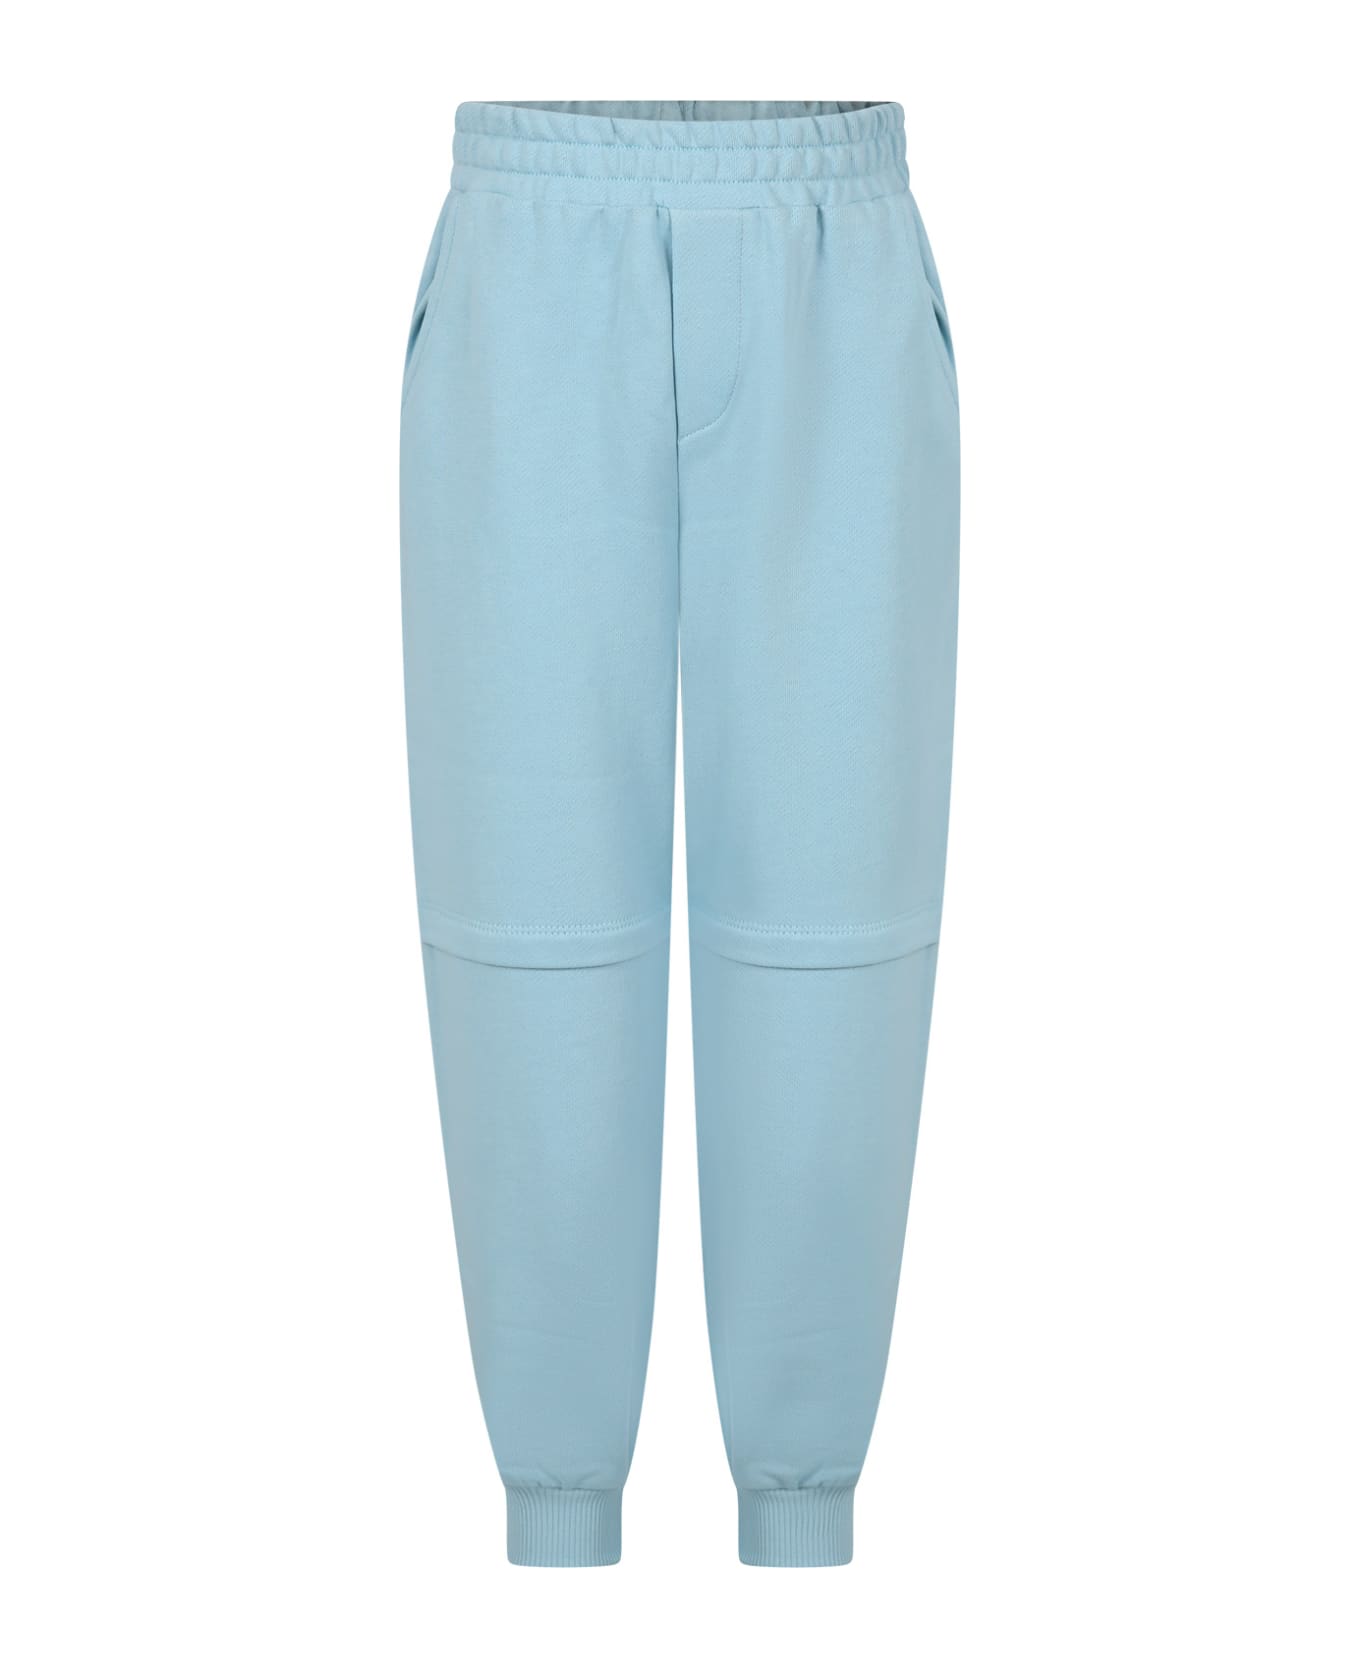 Emporio Armani Light Blue Trousers For Boy With The Smurfs - Light Blue ボトムス